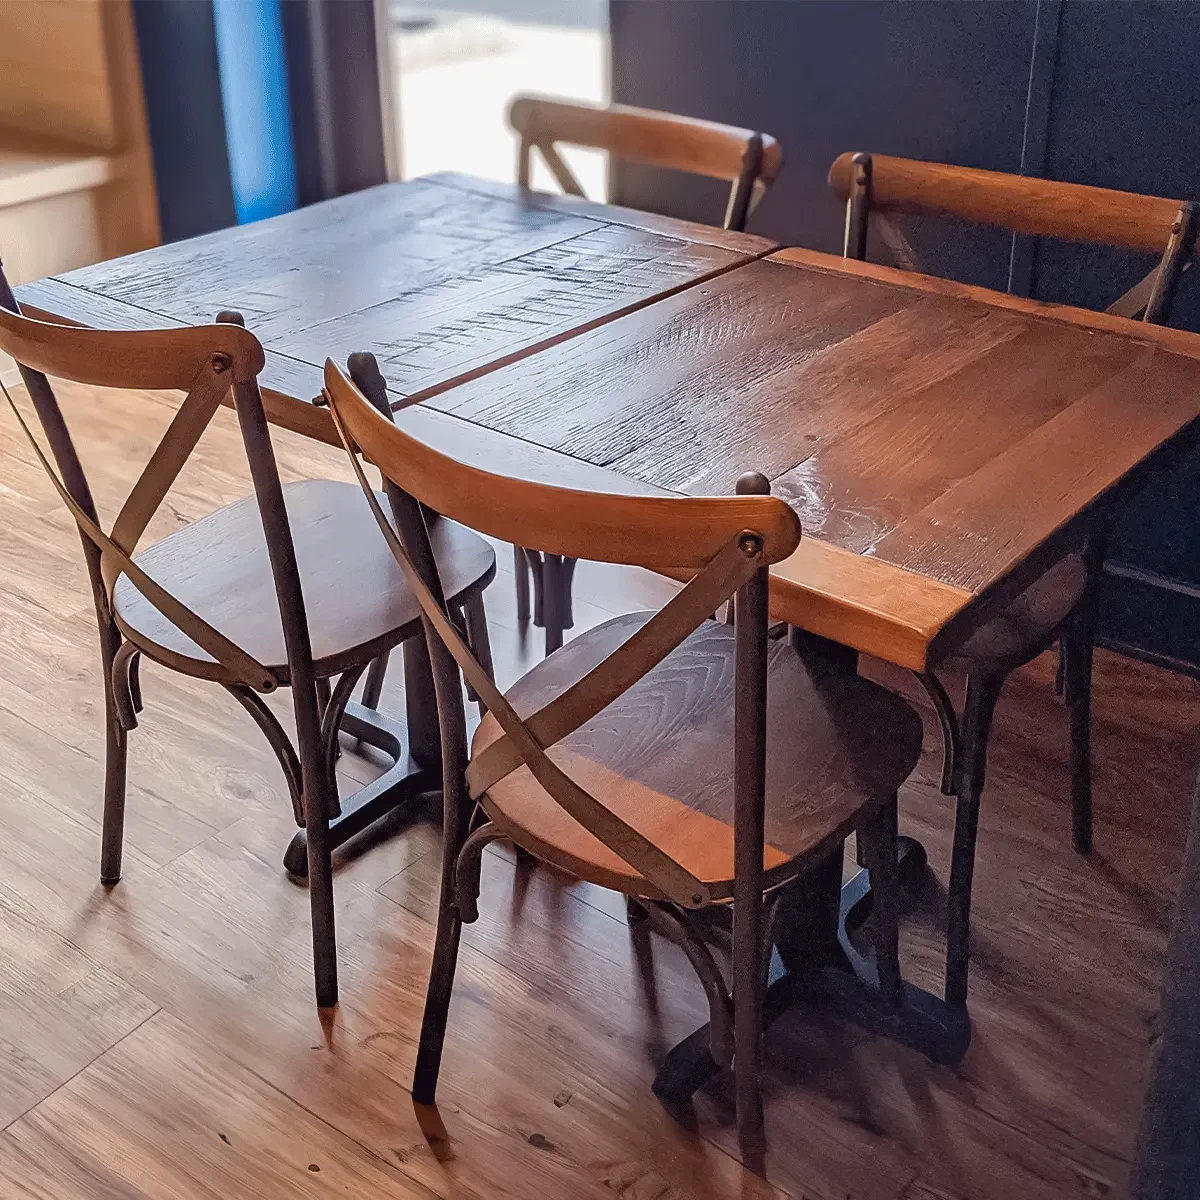 Square Barn Wood Cafe Tables